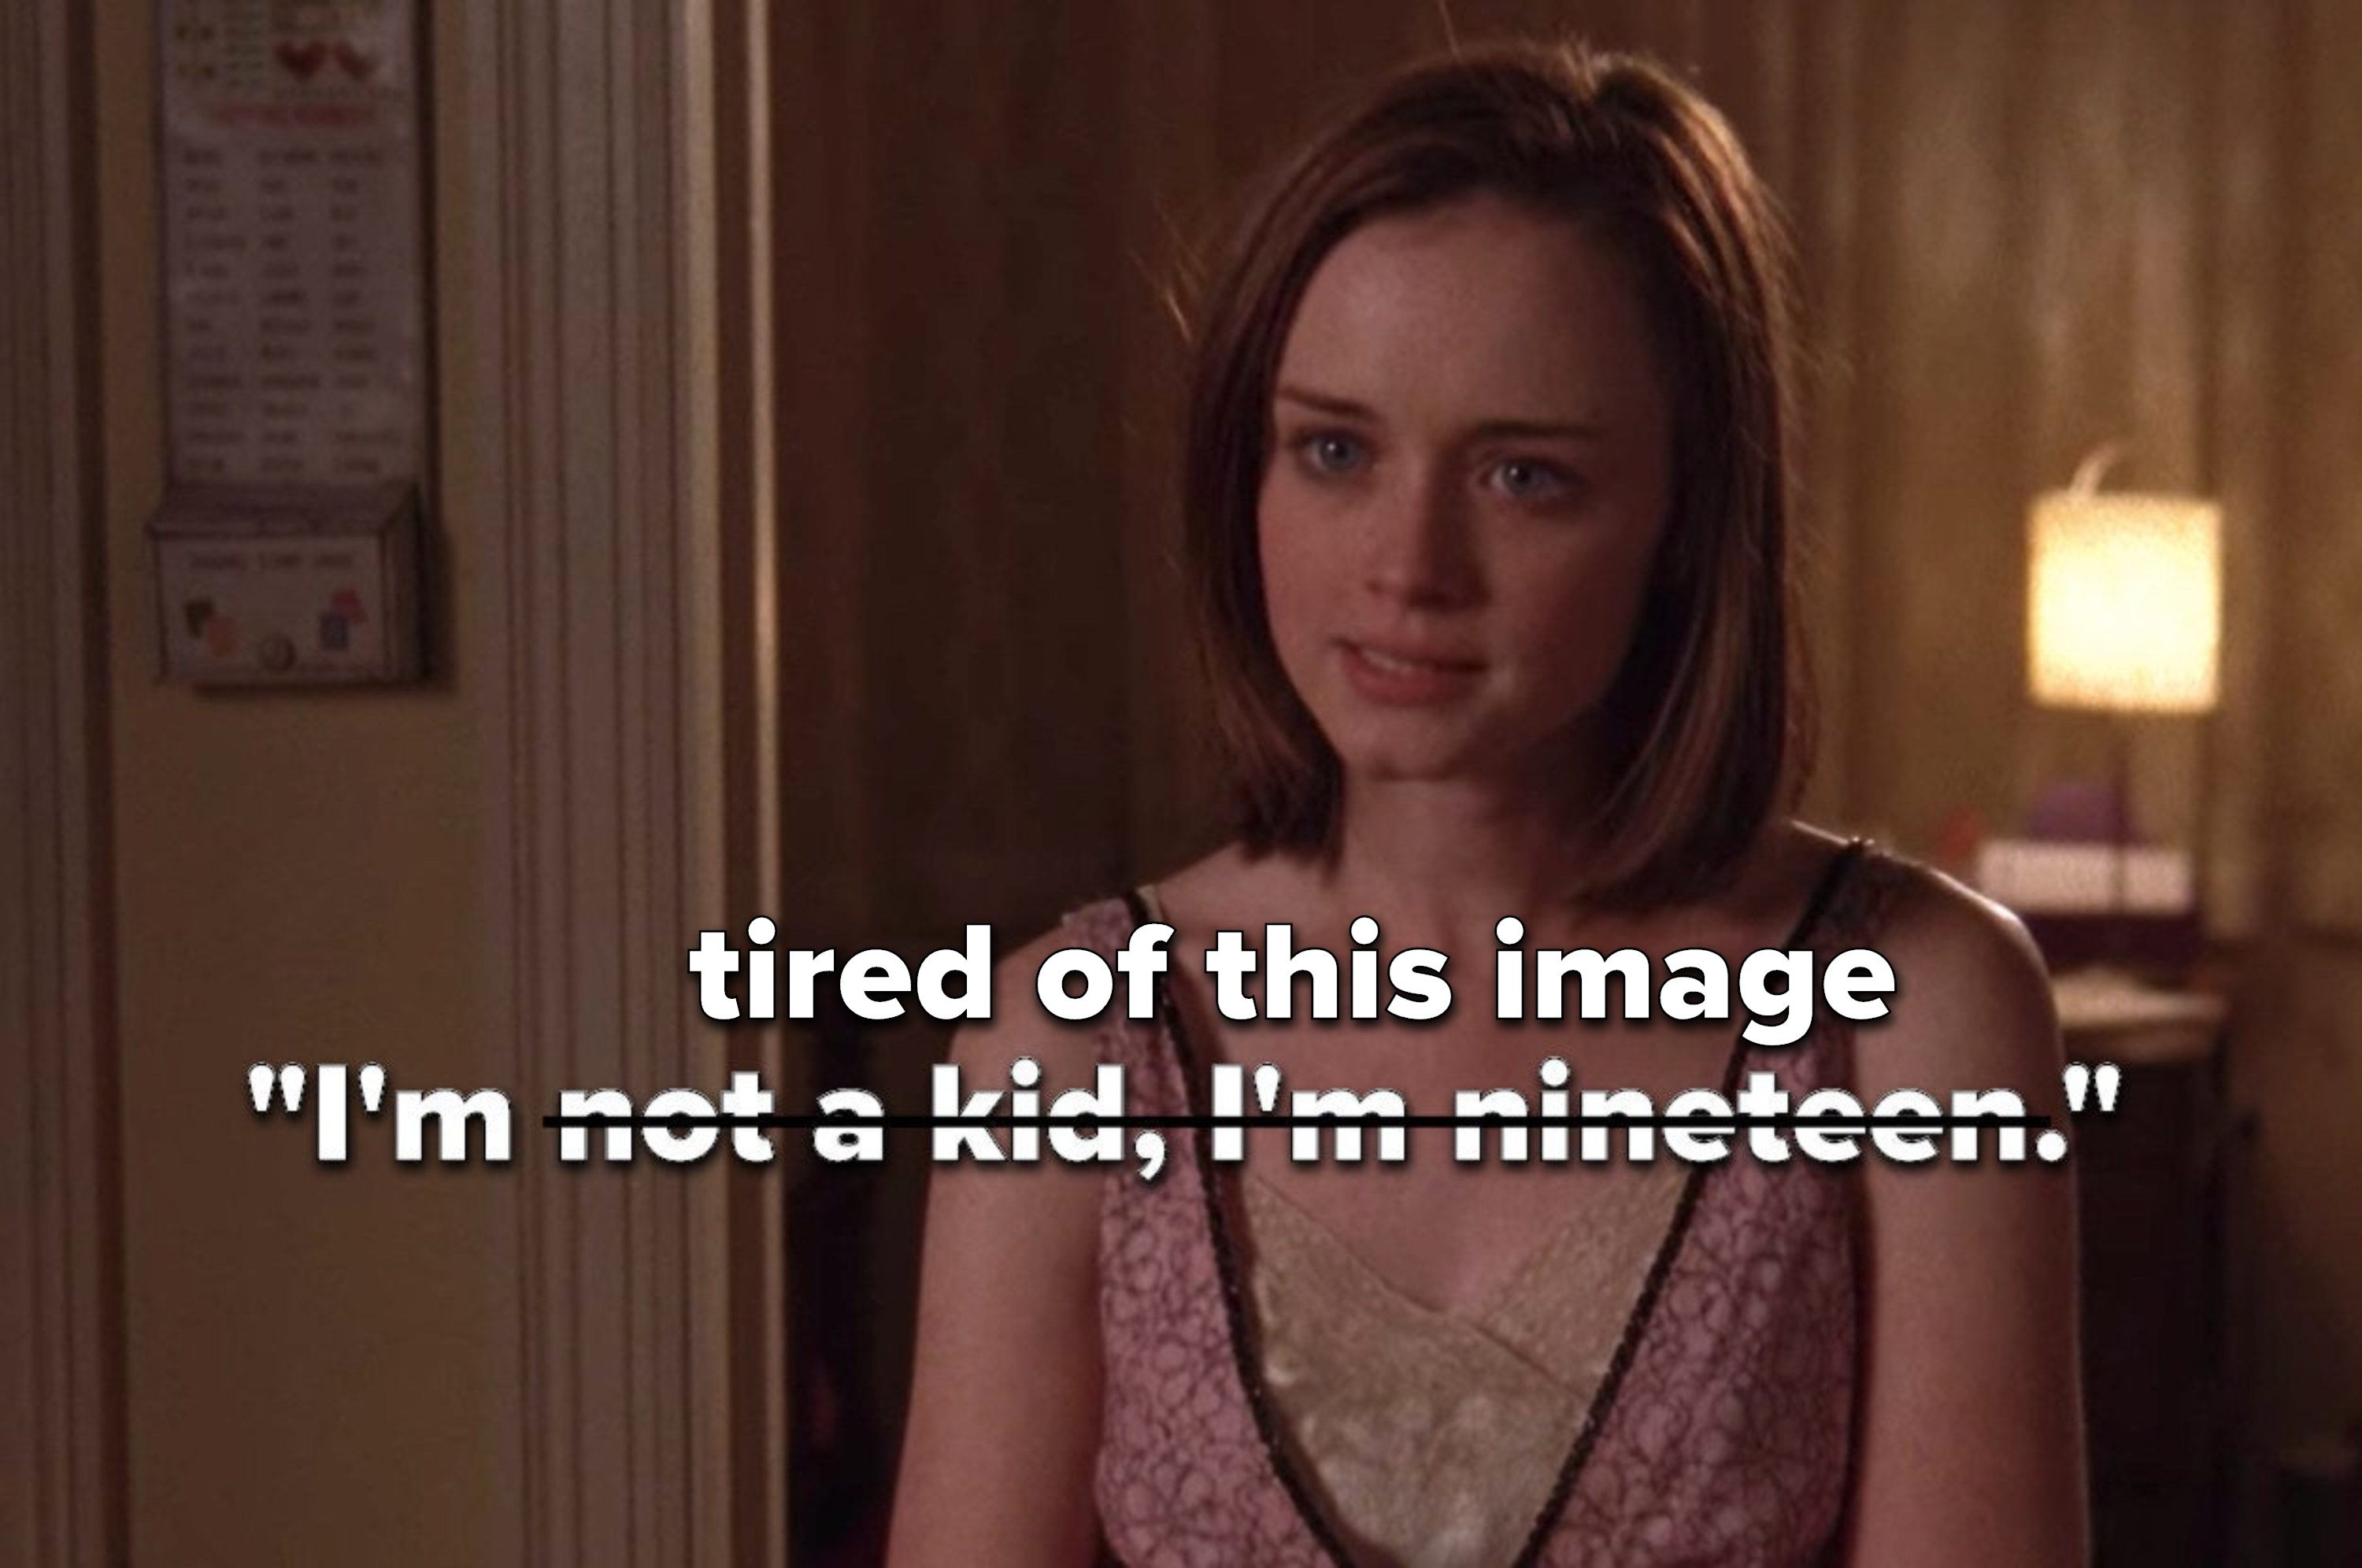 Rory from &quot;Gilmore Girls&quot; saying, &quot;I&#x27;m not a kid, I&#x27;m nineteen,&quot; crossed out to say, &quot;I&#x27;m tired of this image&quot;